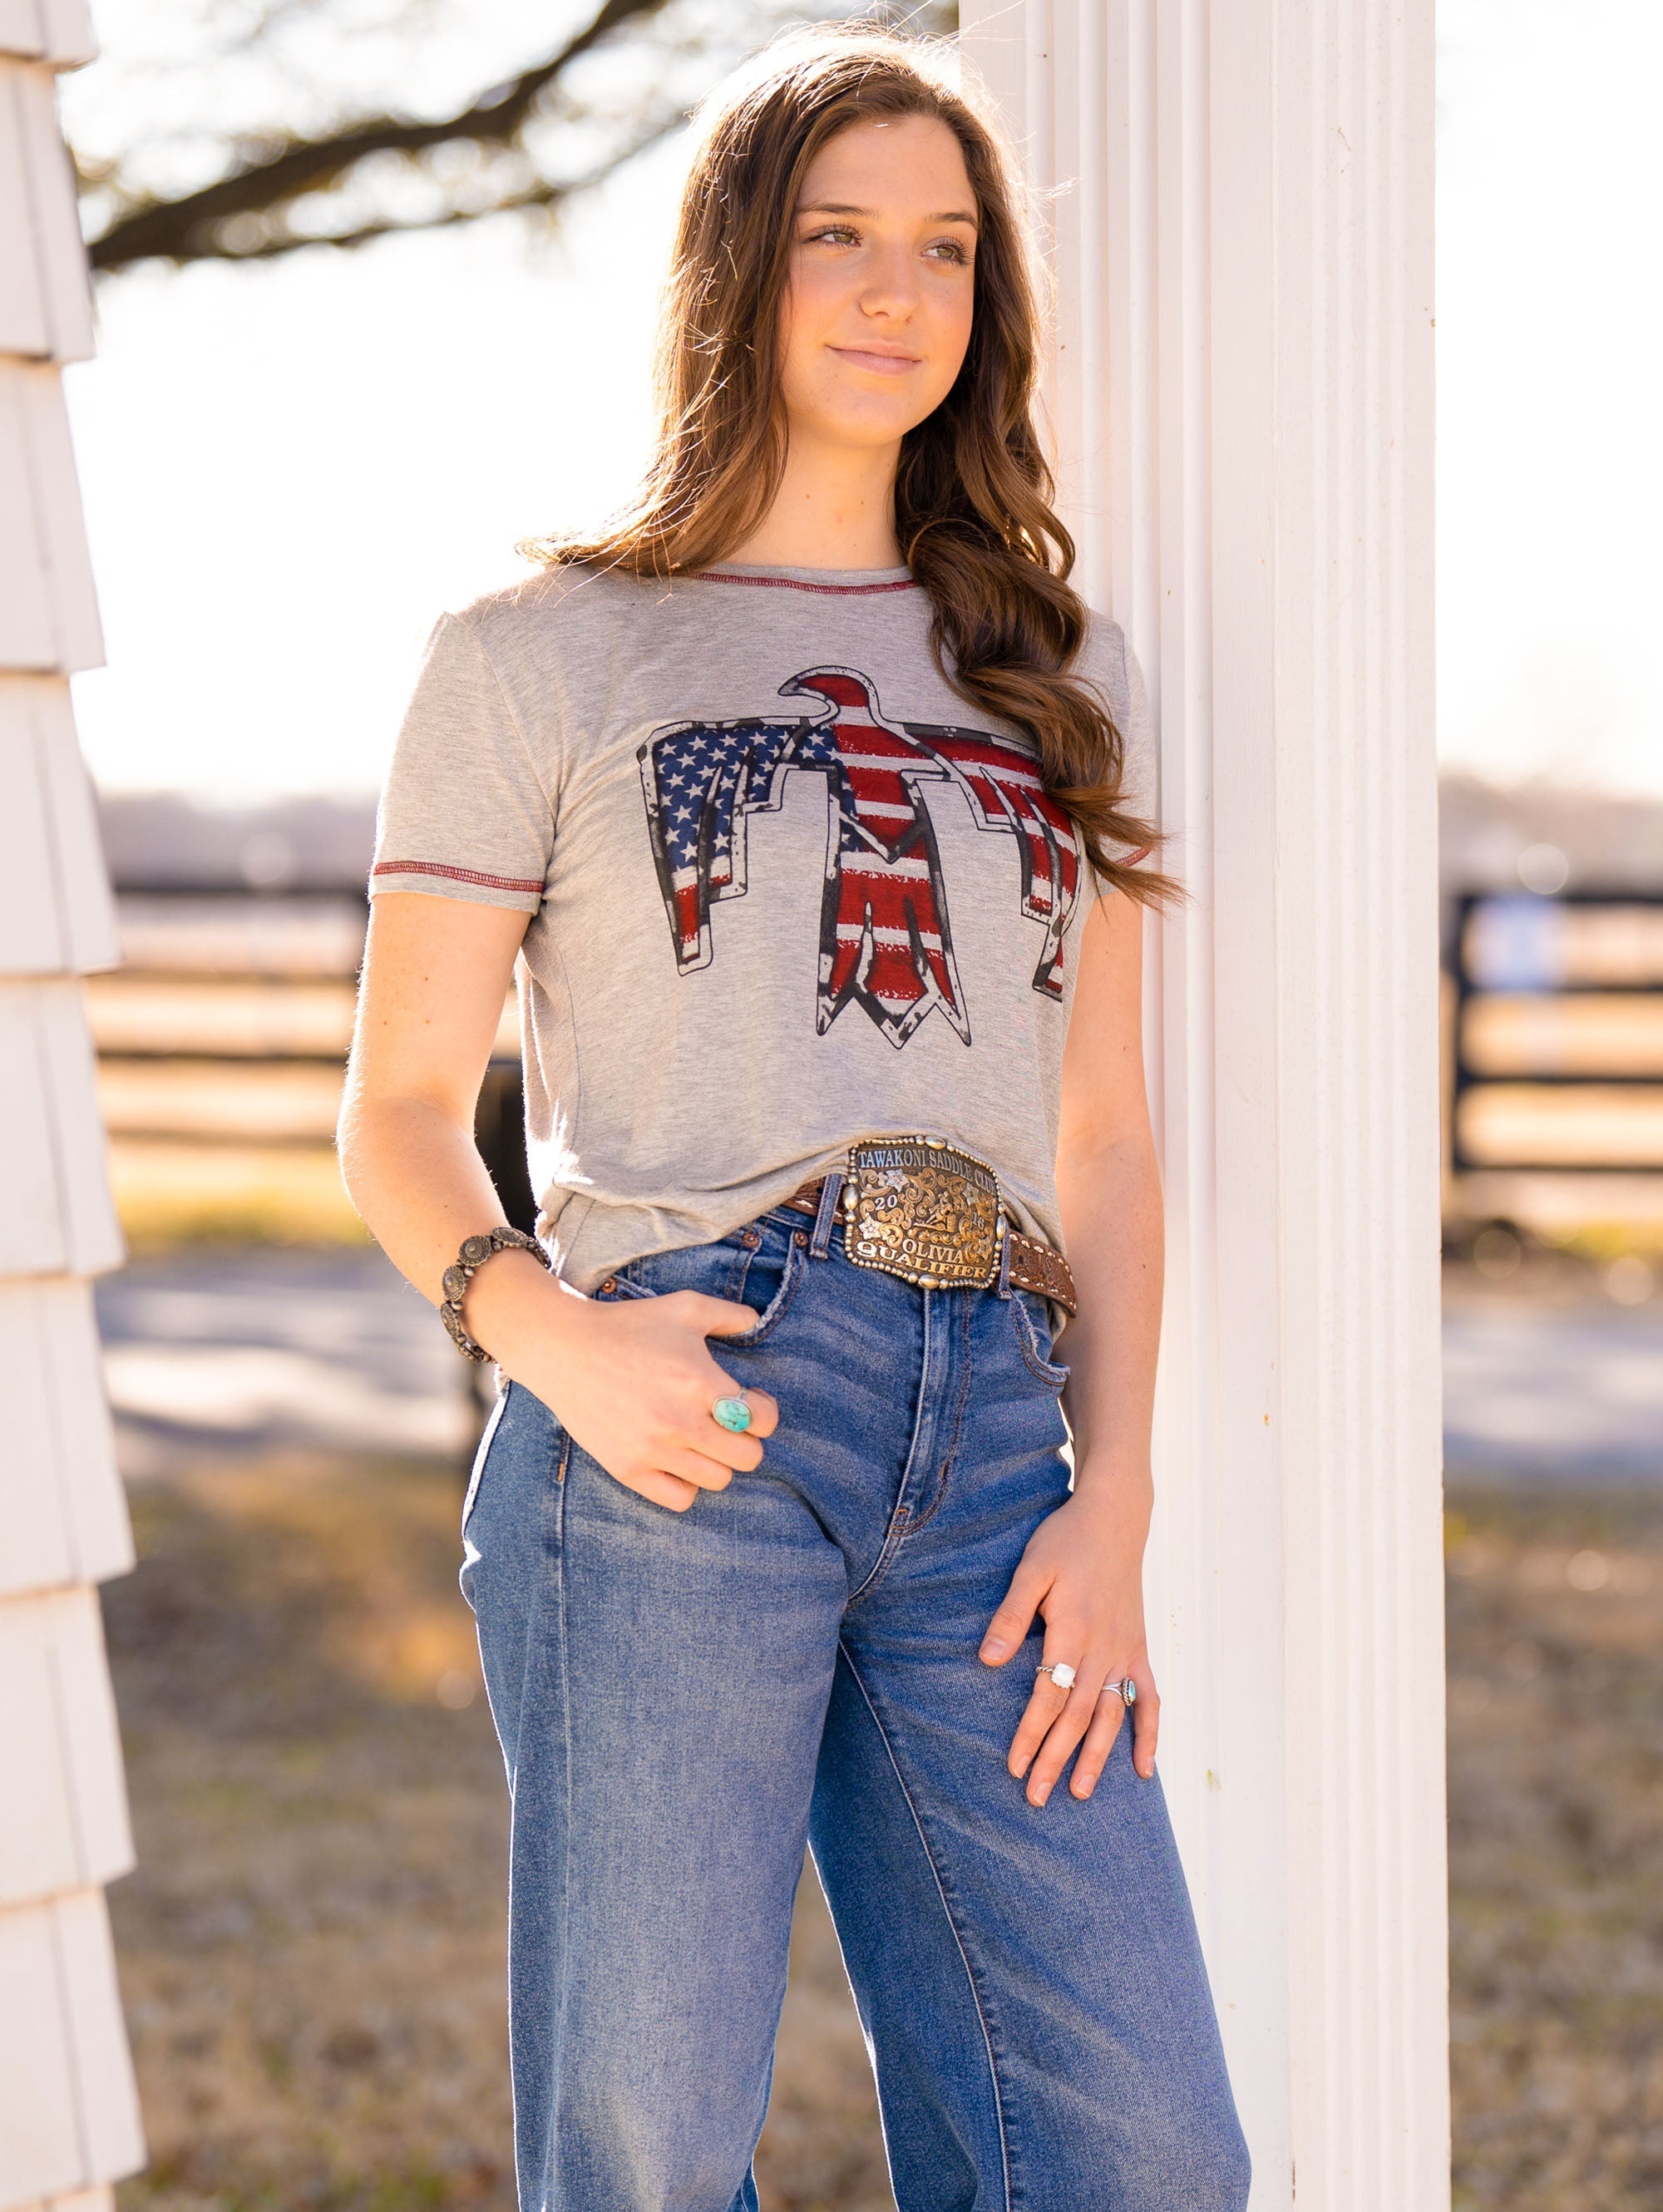 American Bling Women's Washed American Pride Wild Soul Tee - Montana West World